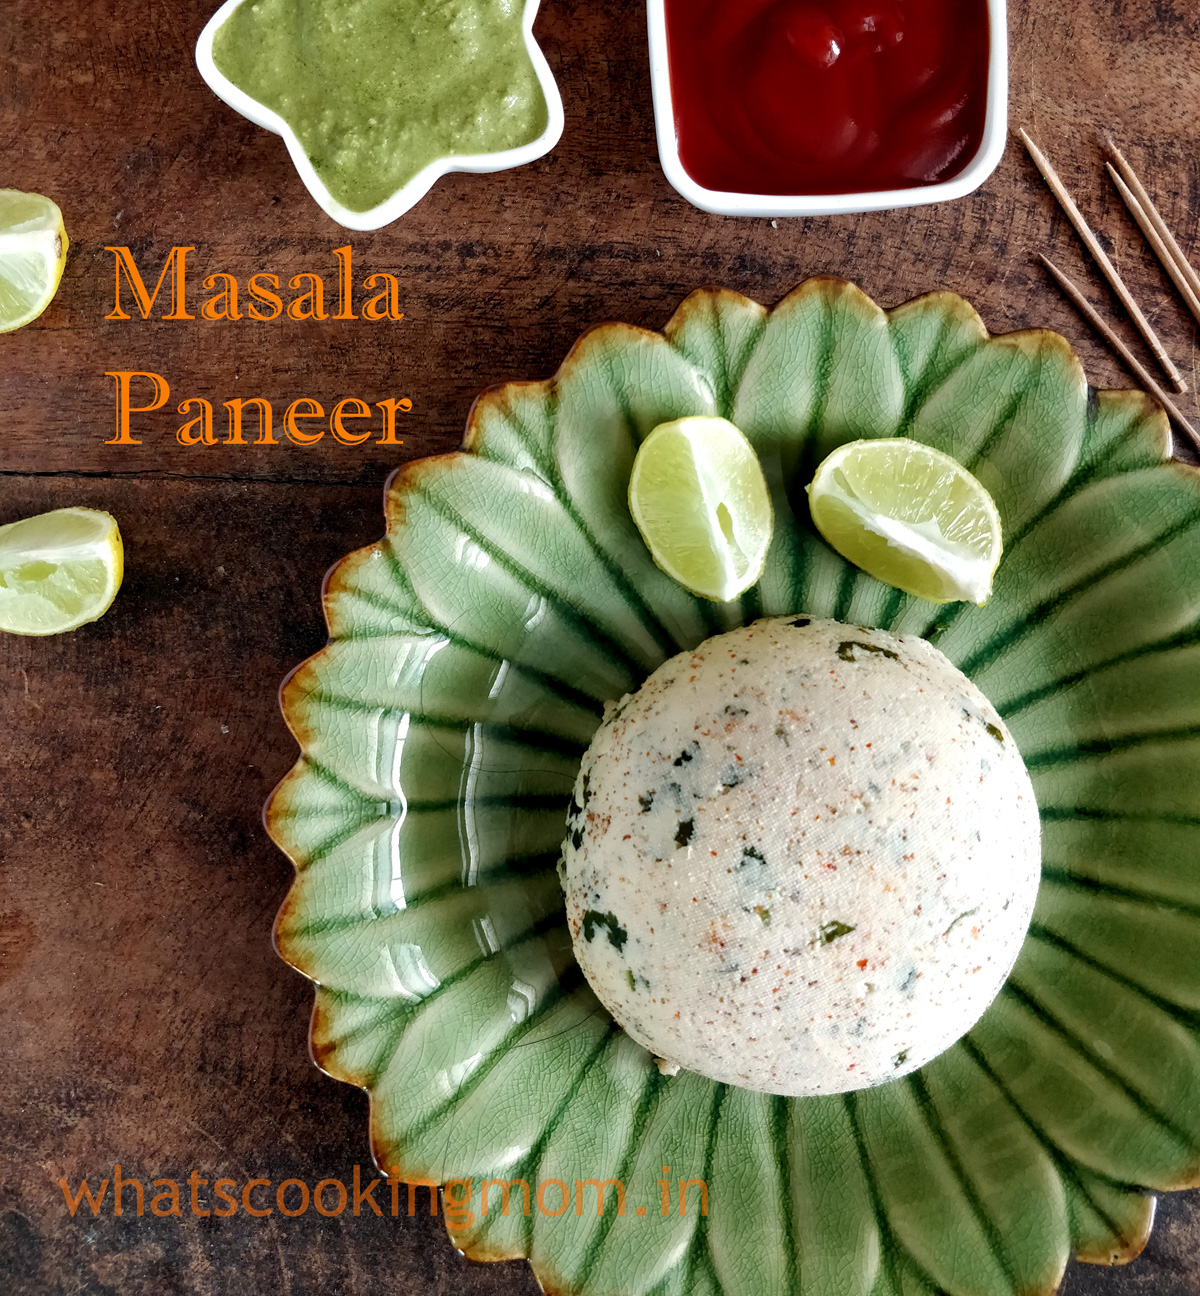 Homemade Masala Paneer - spiced cottage cheese, healthy vegetarian appetizer, nutritious, good for kids